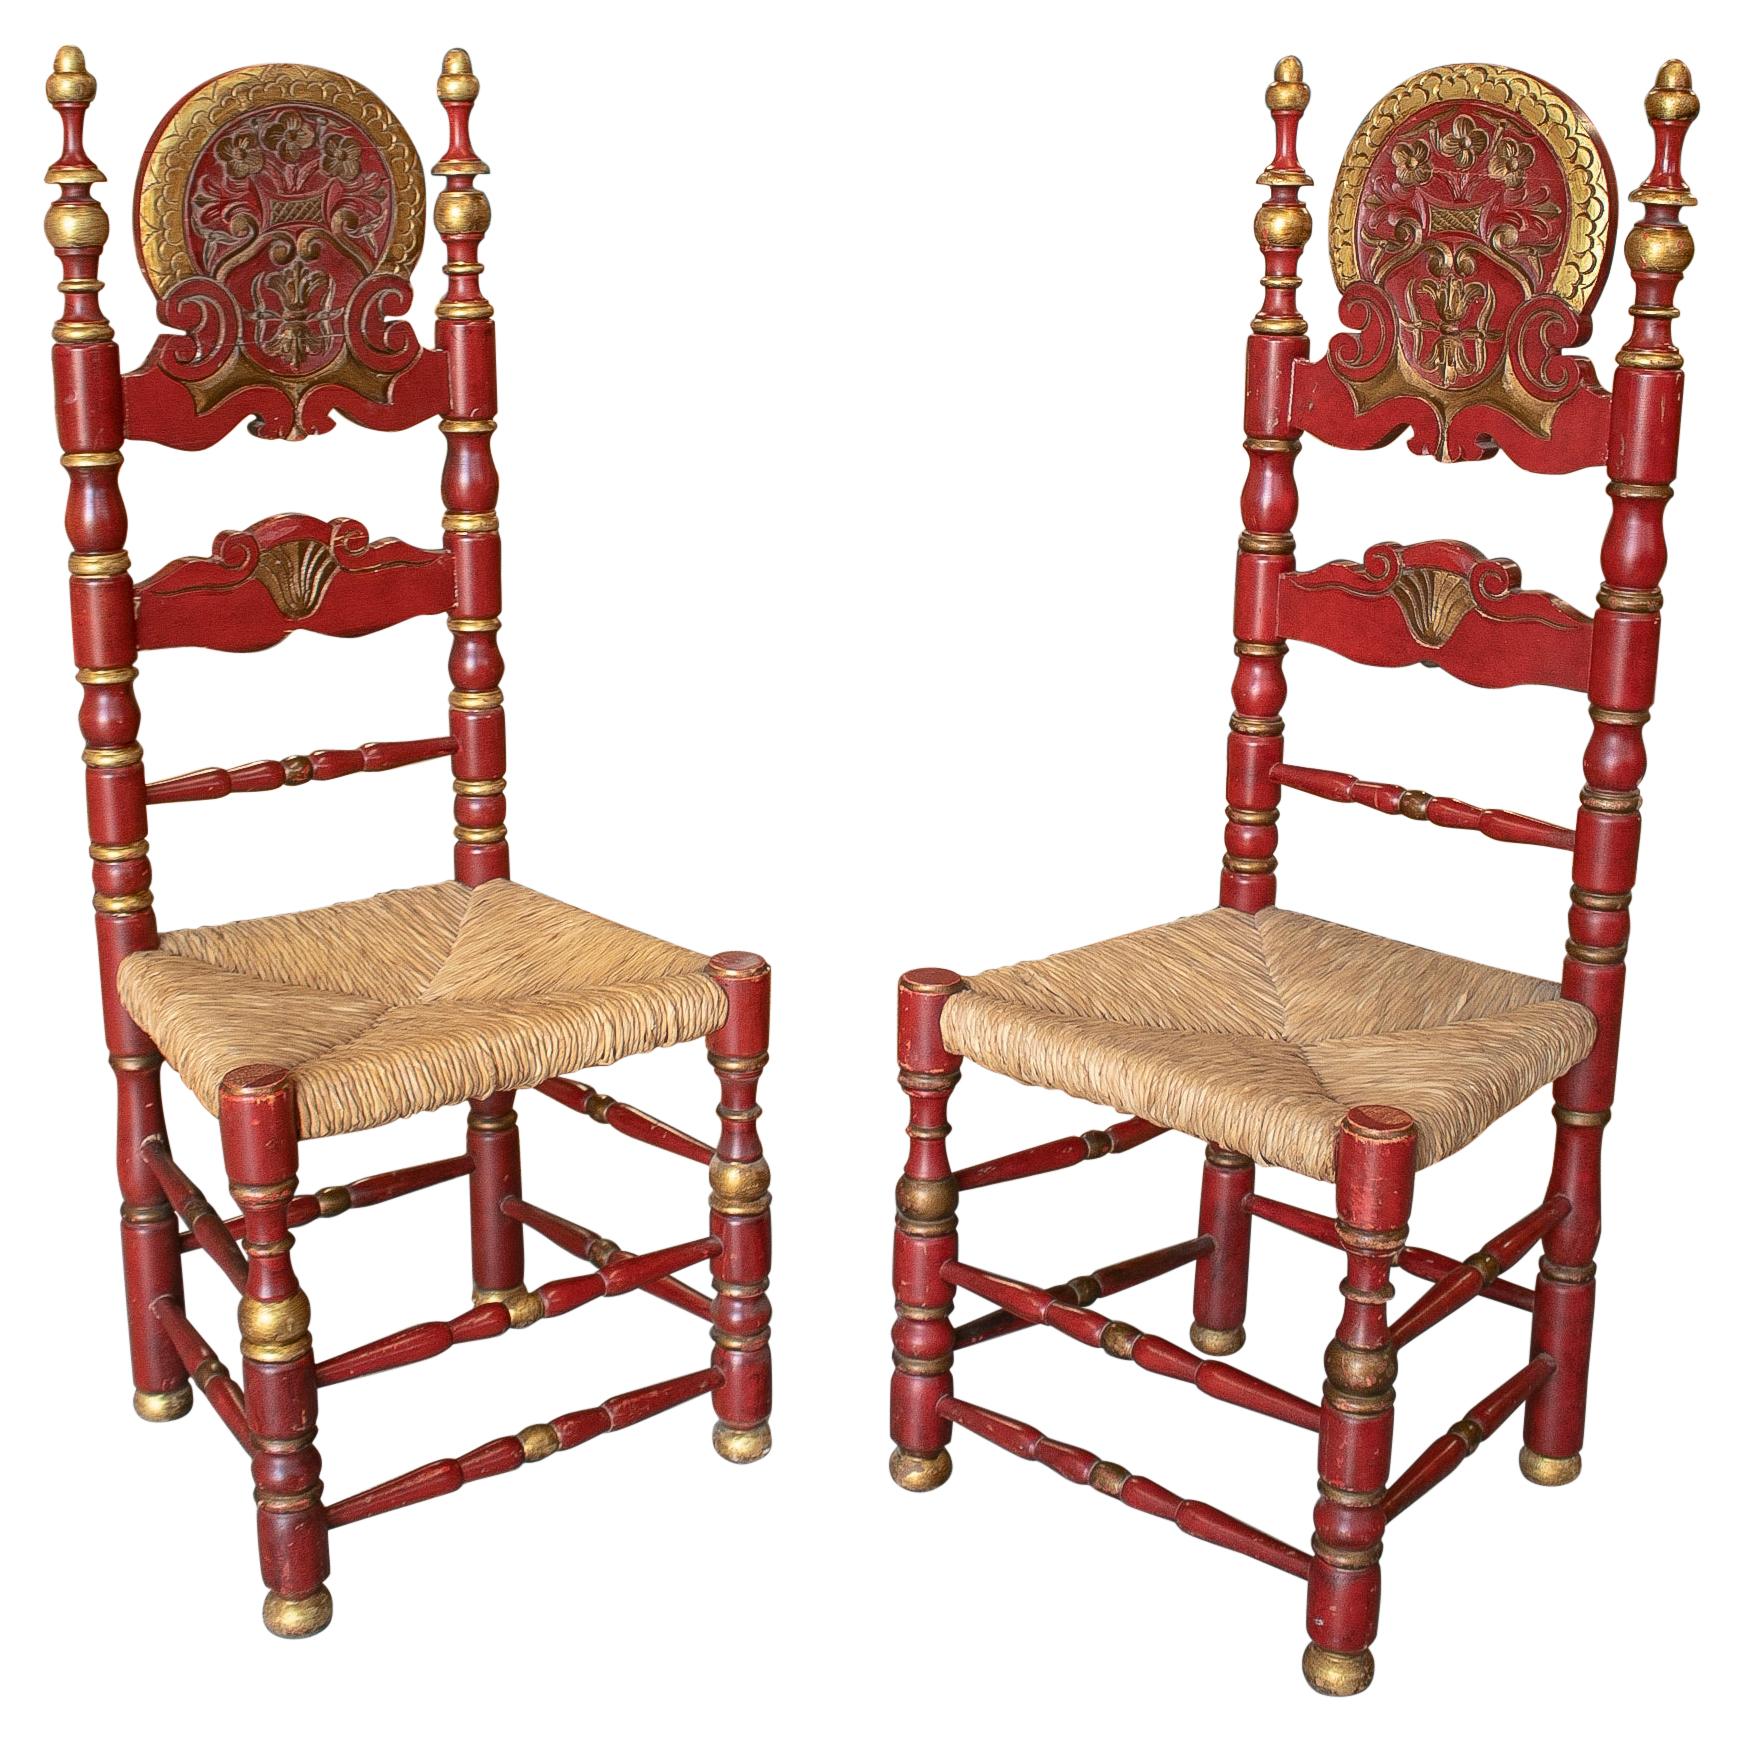 Pair of 1950s Spanish Painted Wooden Chairs w/ Woven Dry Rope Seats